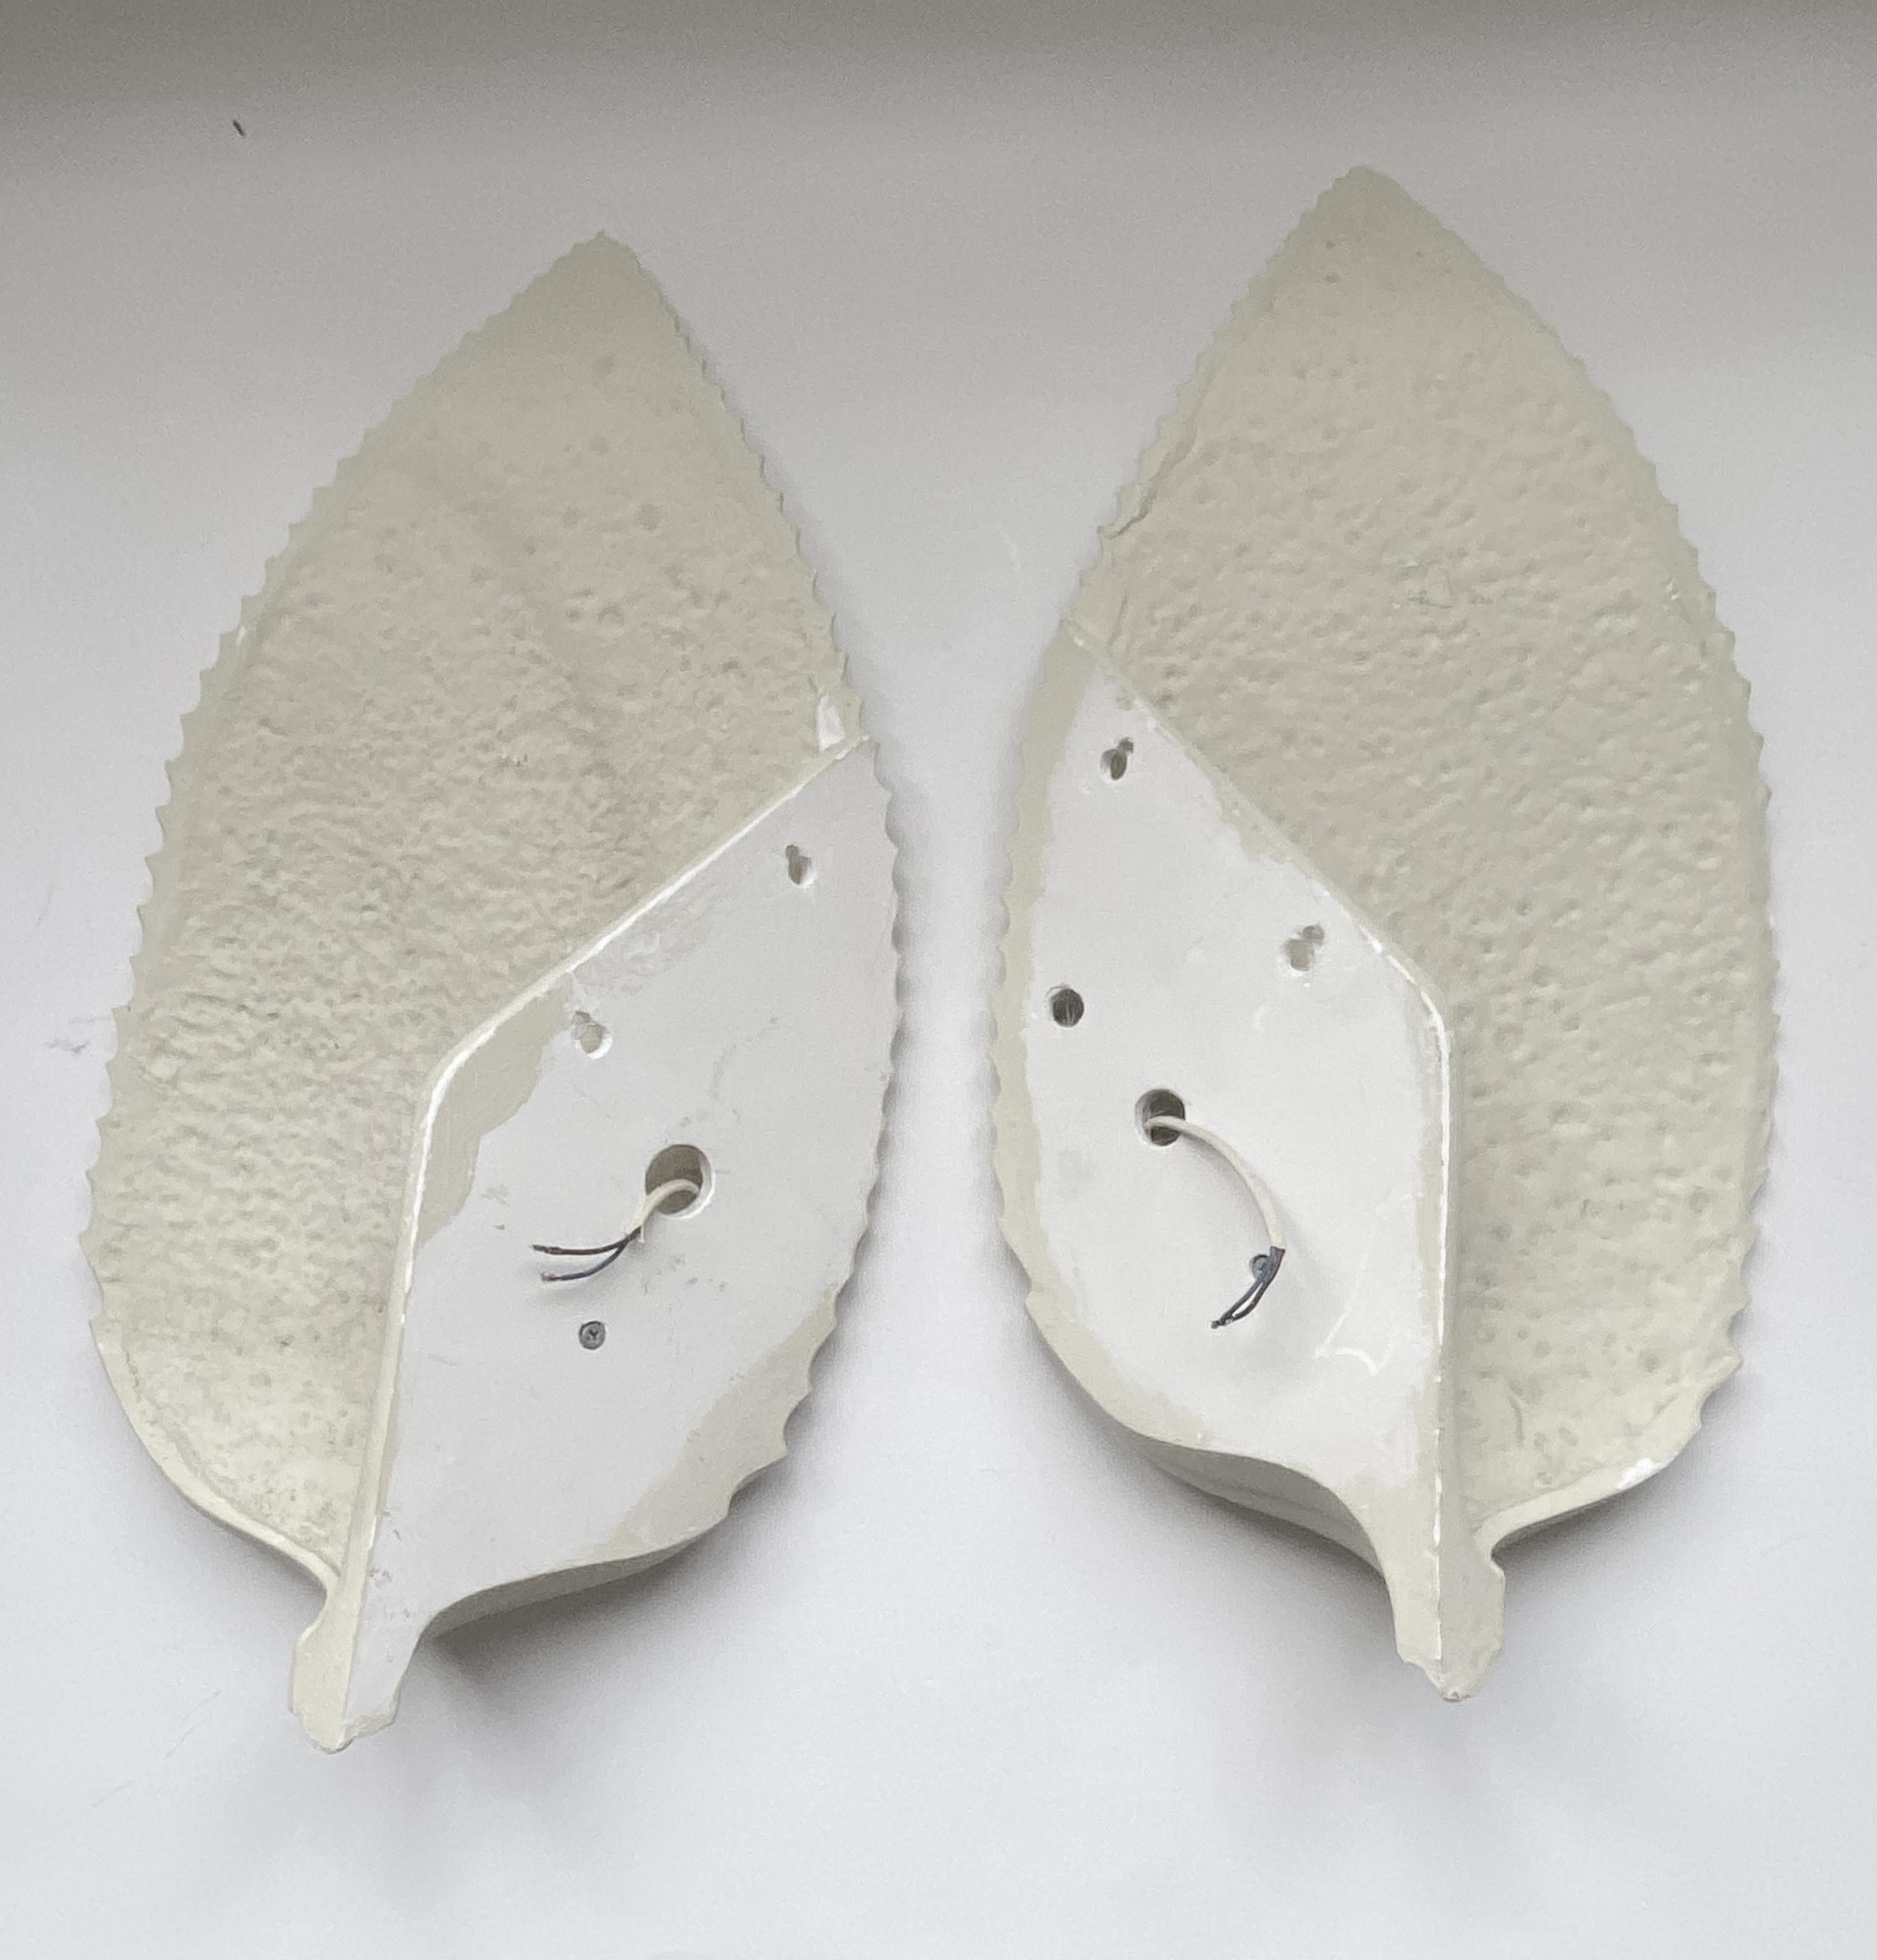 Late 20th Century French Plaster Beech Leaf Sconce in the style of Atelier Sedap, 1990s, set of 2.